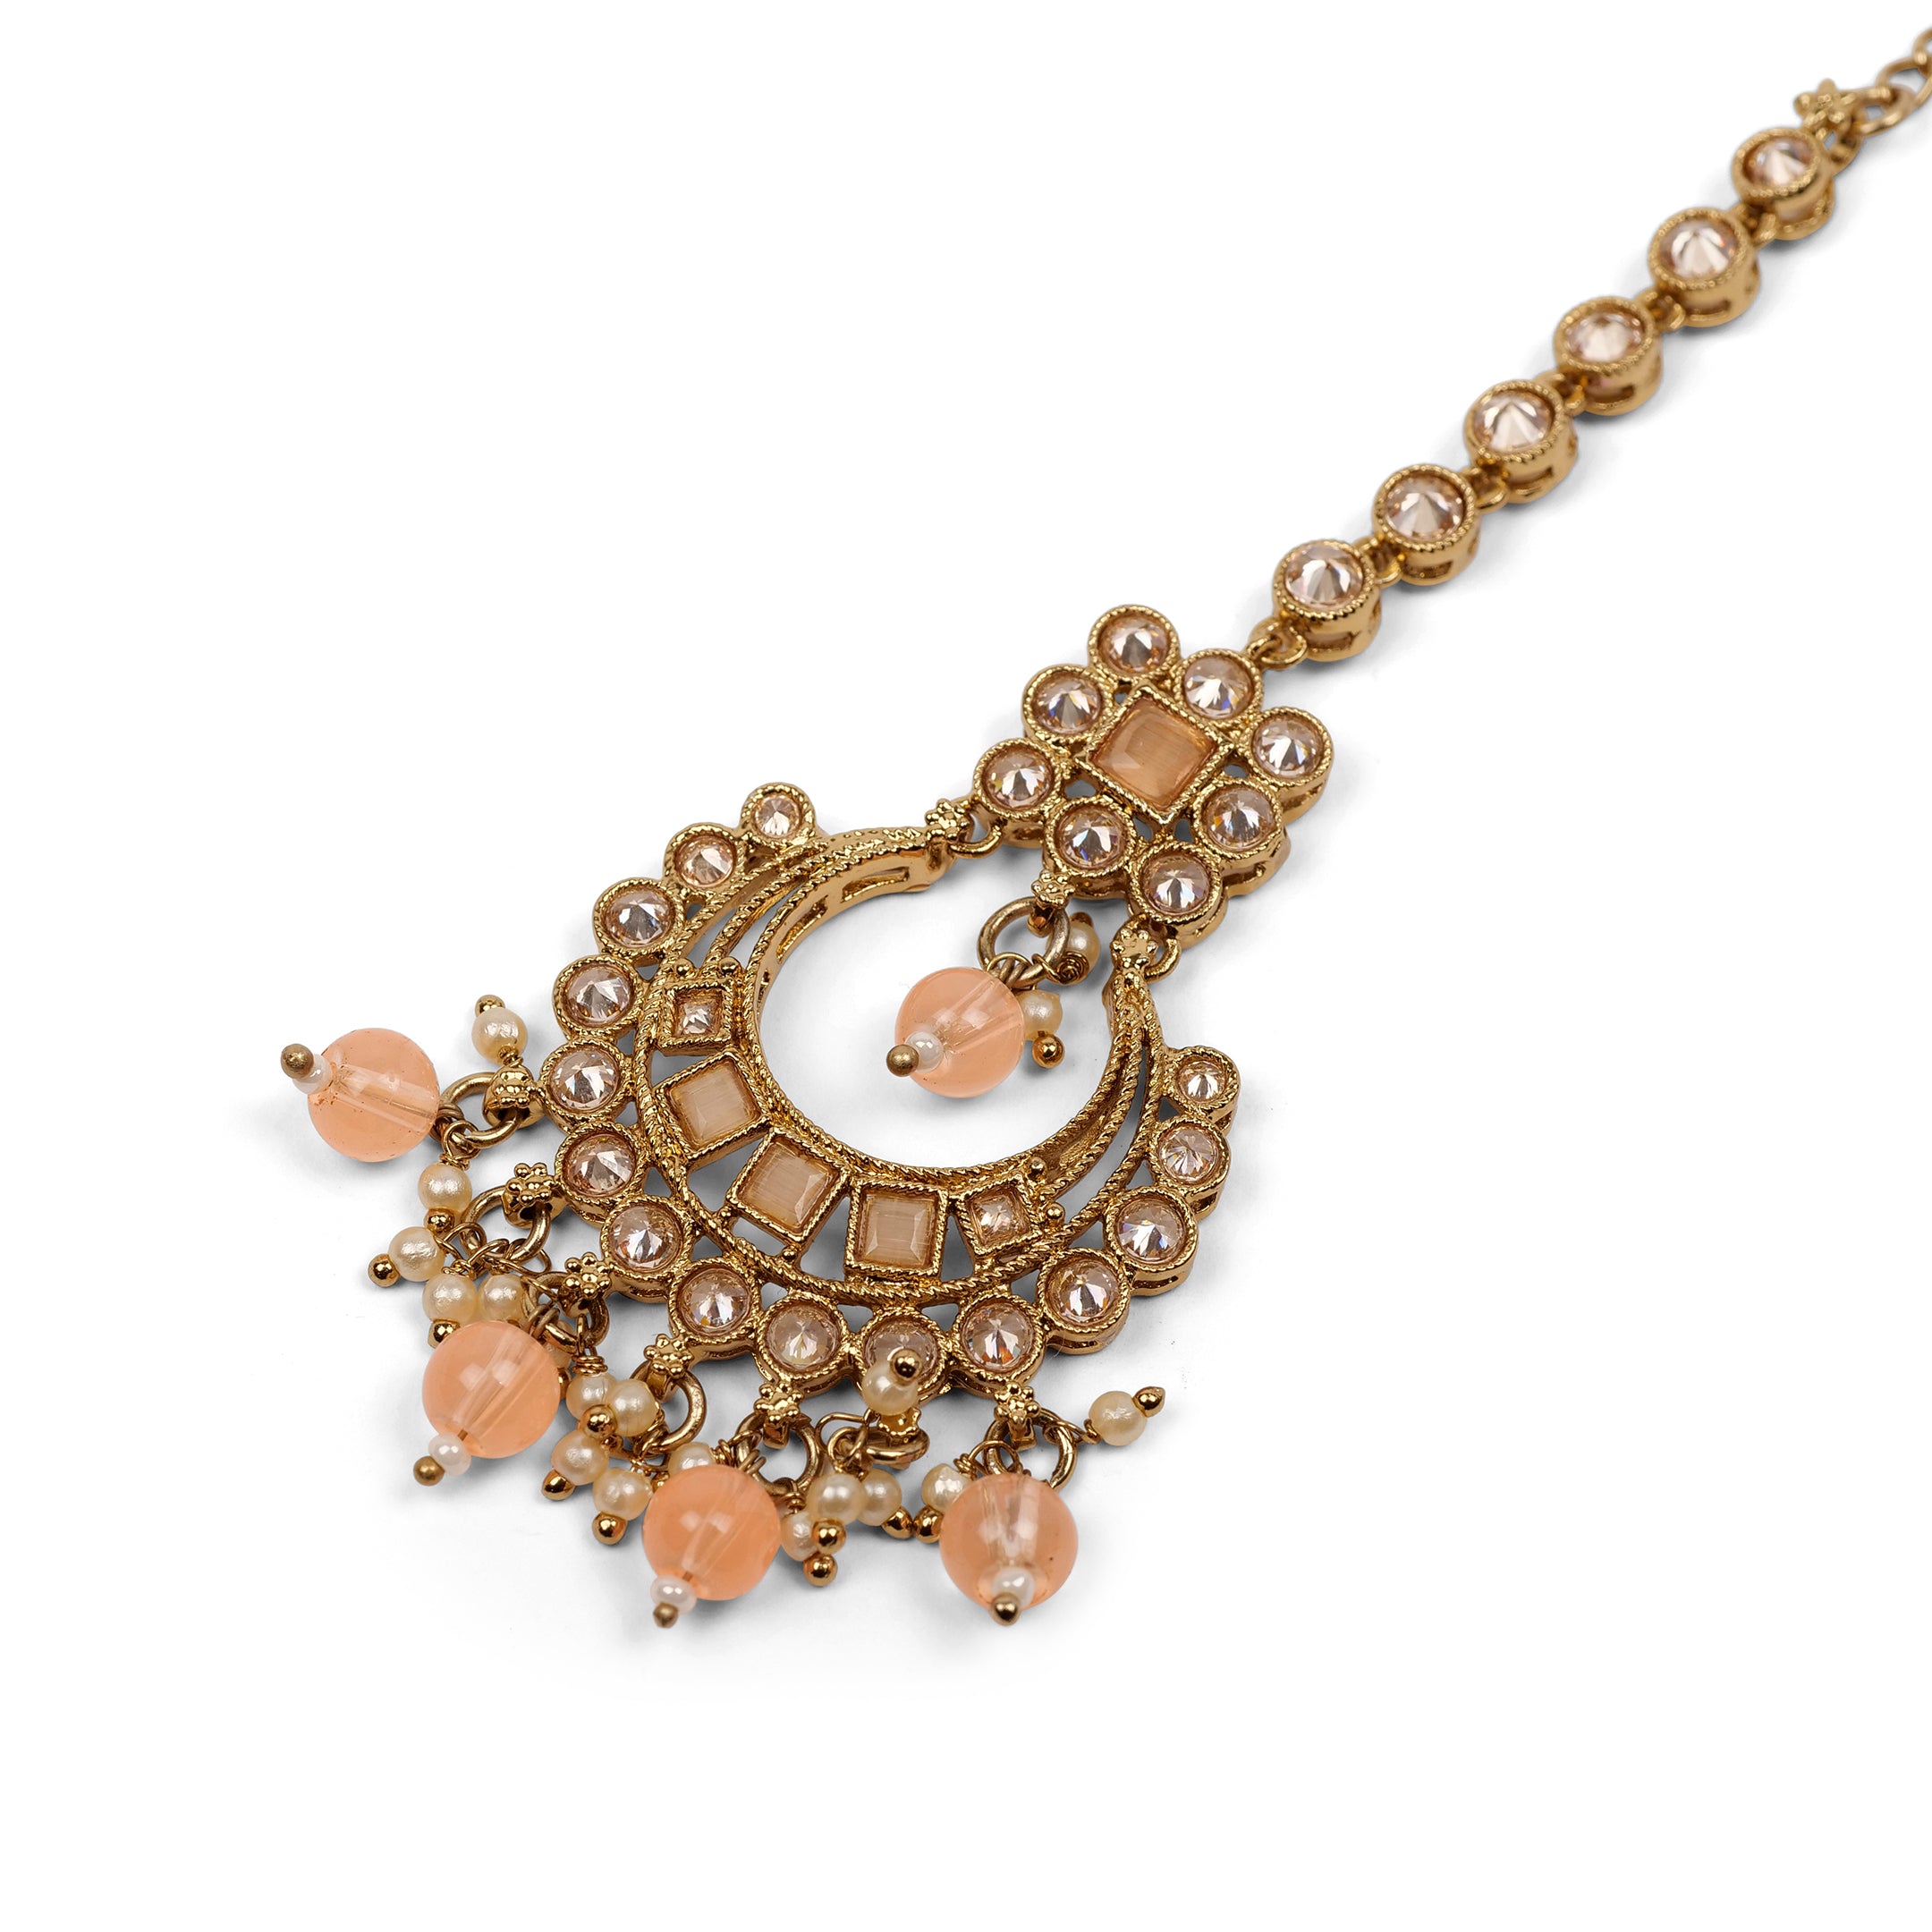 Sana Necklace Set in Peach and Antique Gold